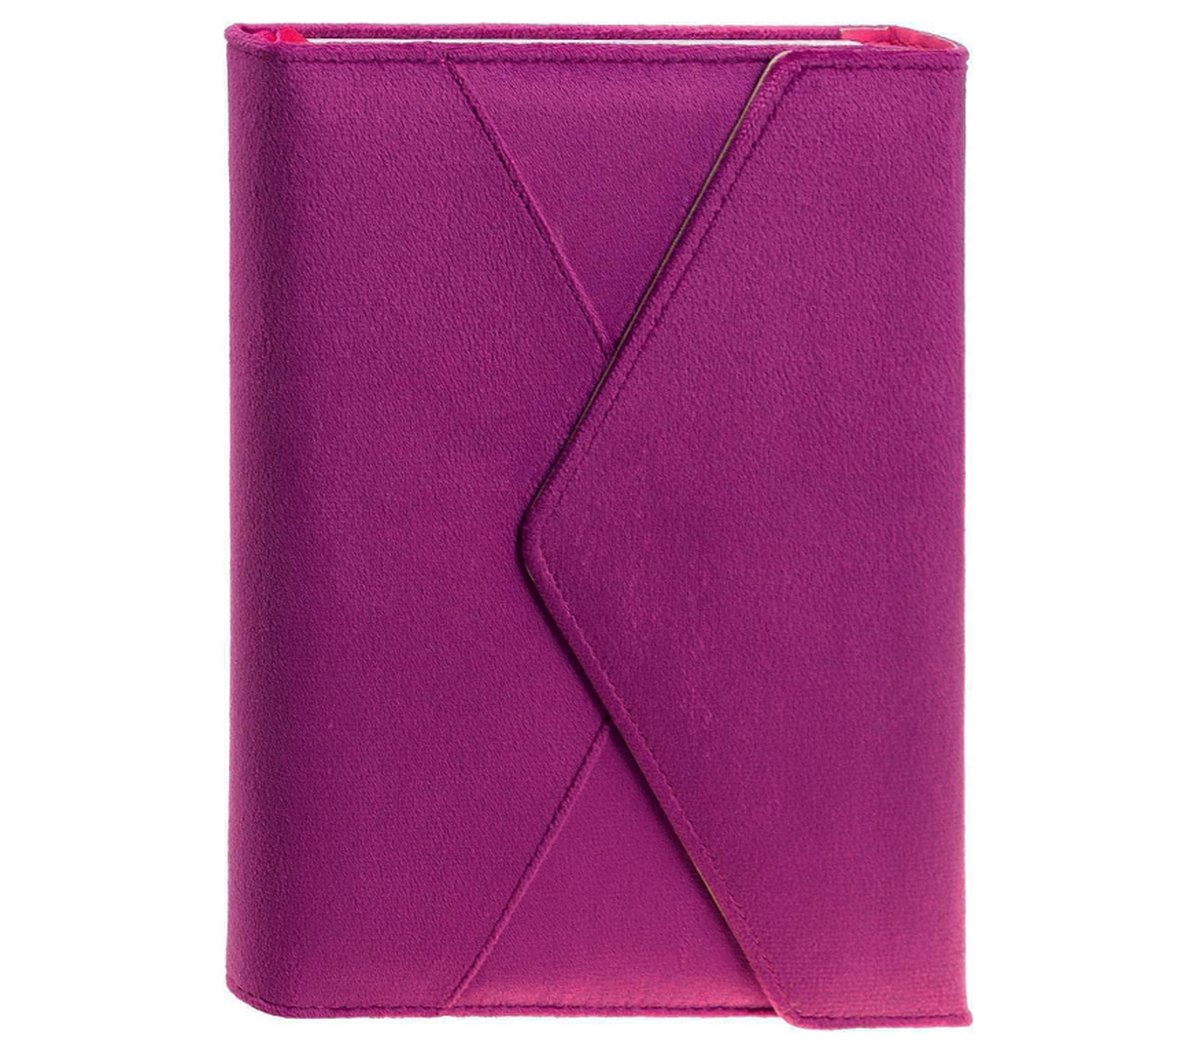 Eccolo Lined Journal Notebook, Velvet Hardcover, 256 Ruled Pages of Acid-Free Ivory Color Paper, Magnetic Flap Closure, 3 Bookmarks (Purple, 20.32 x 15.24 x 1.27 cm) Unknown Binding